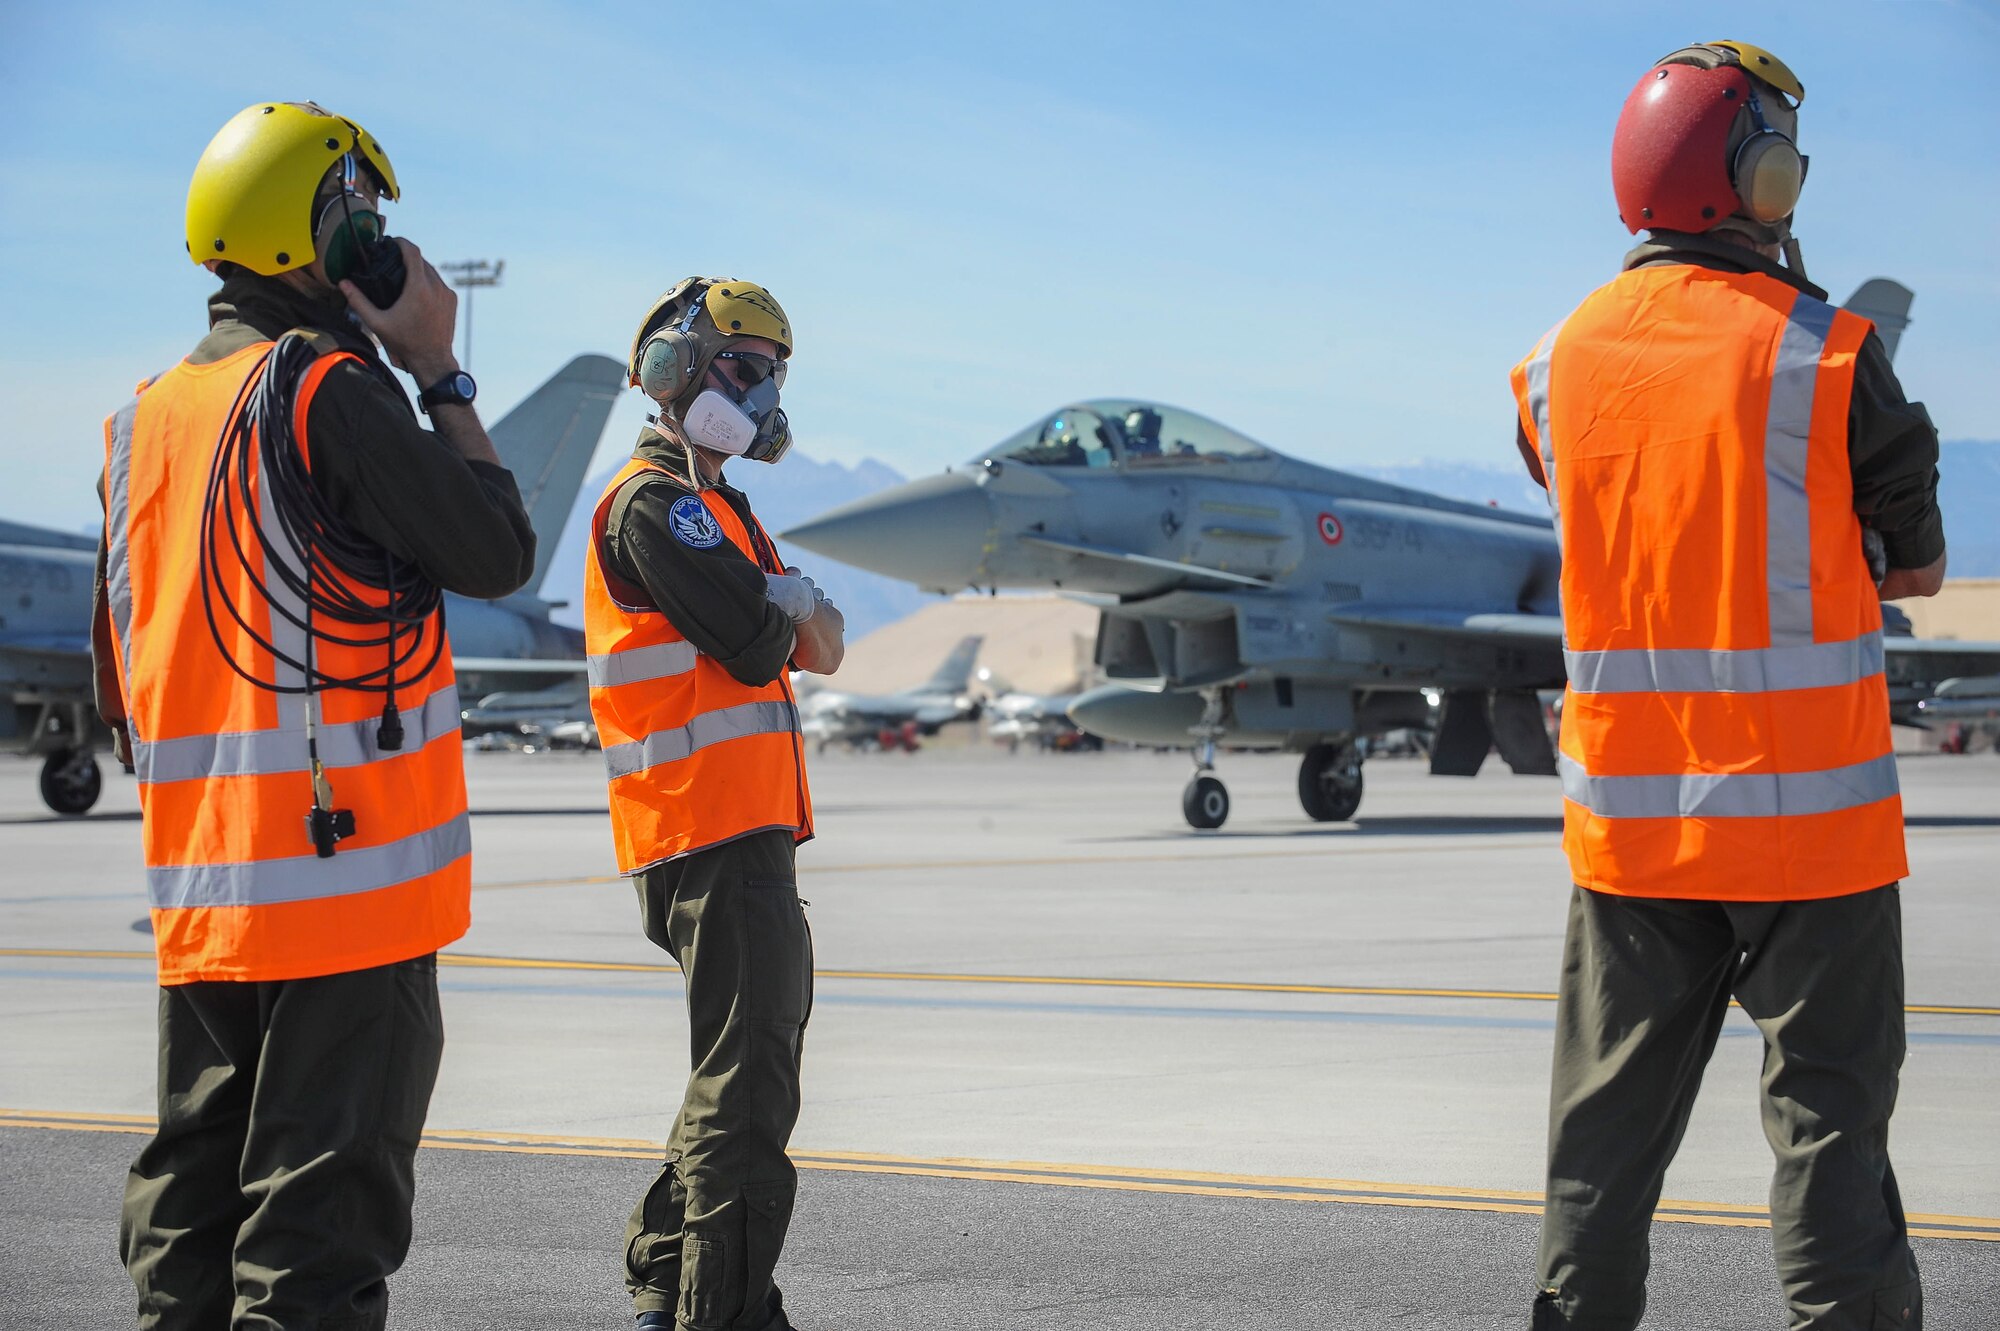 Crew members from the 4th Fighter Wing, Grosseto, Italy, conducts pre-flight checks in preparation for take-off during Red Flag 16-2 March 3, 2016 at Nellis Air Force Base, Nev. Red Flag provides an opportunity for aircrew and maintainers to enhance their tactical operational skills alongside military aircraft from coalition forces. (U.S. Air Force photo by Senior Airman Jake Carter)